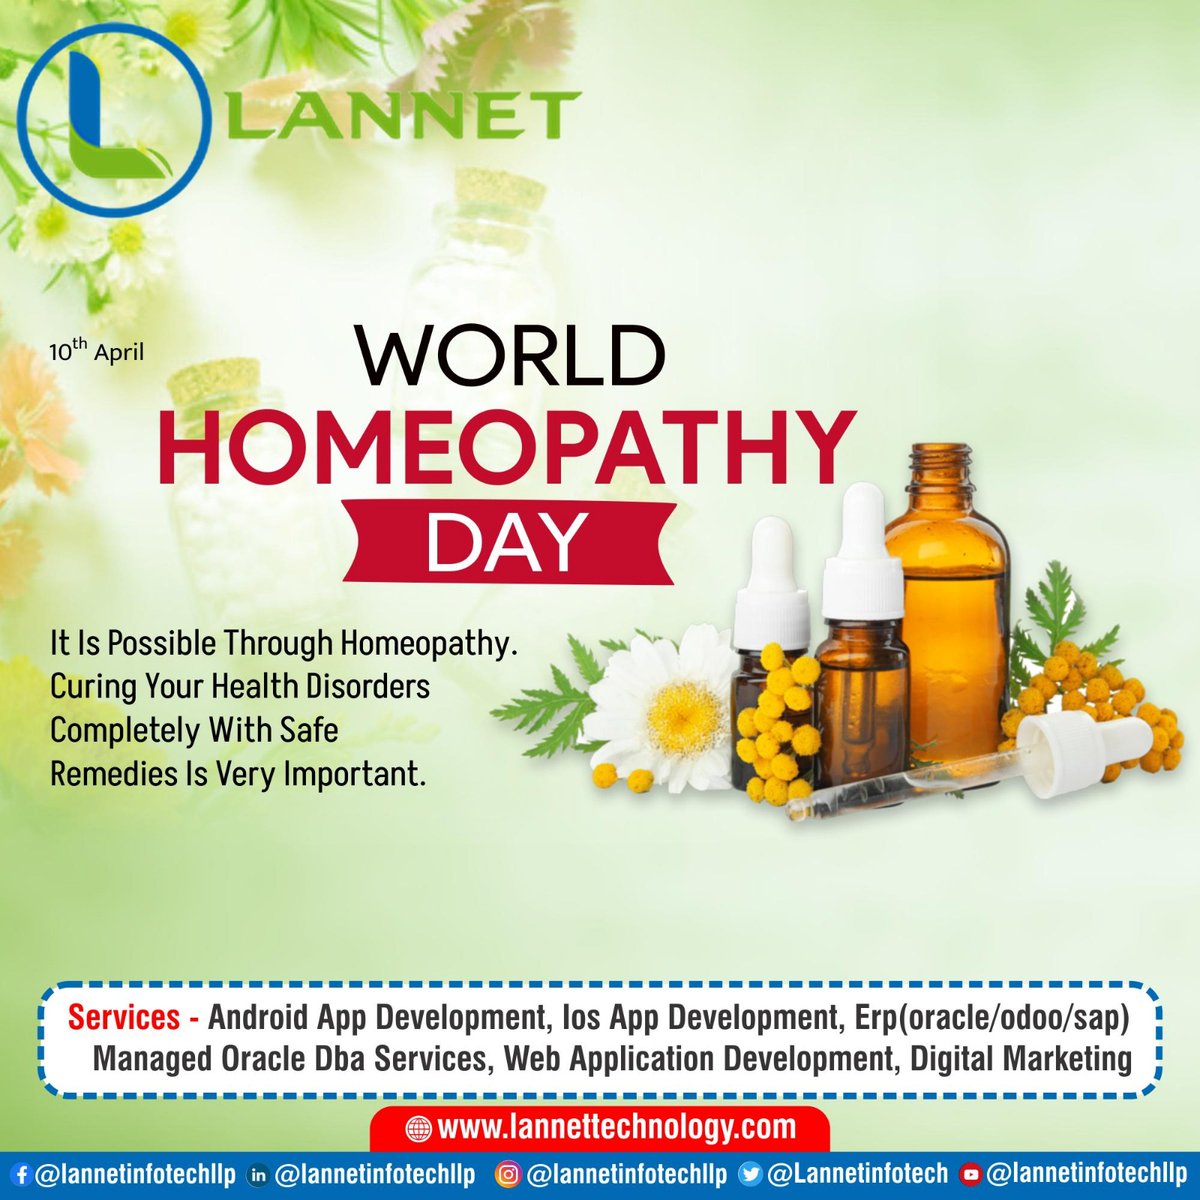 'Happy World Homeopathy Day to all homeopaths and supporters! Your dedication to natural healing is truly commendable.'
.
.
.
#HomeopathyDay #NaturalMedicine